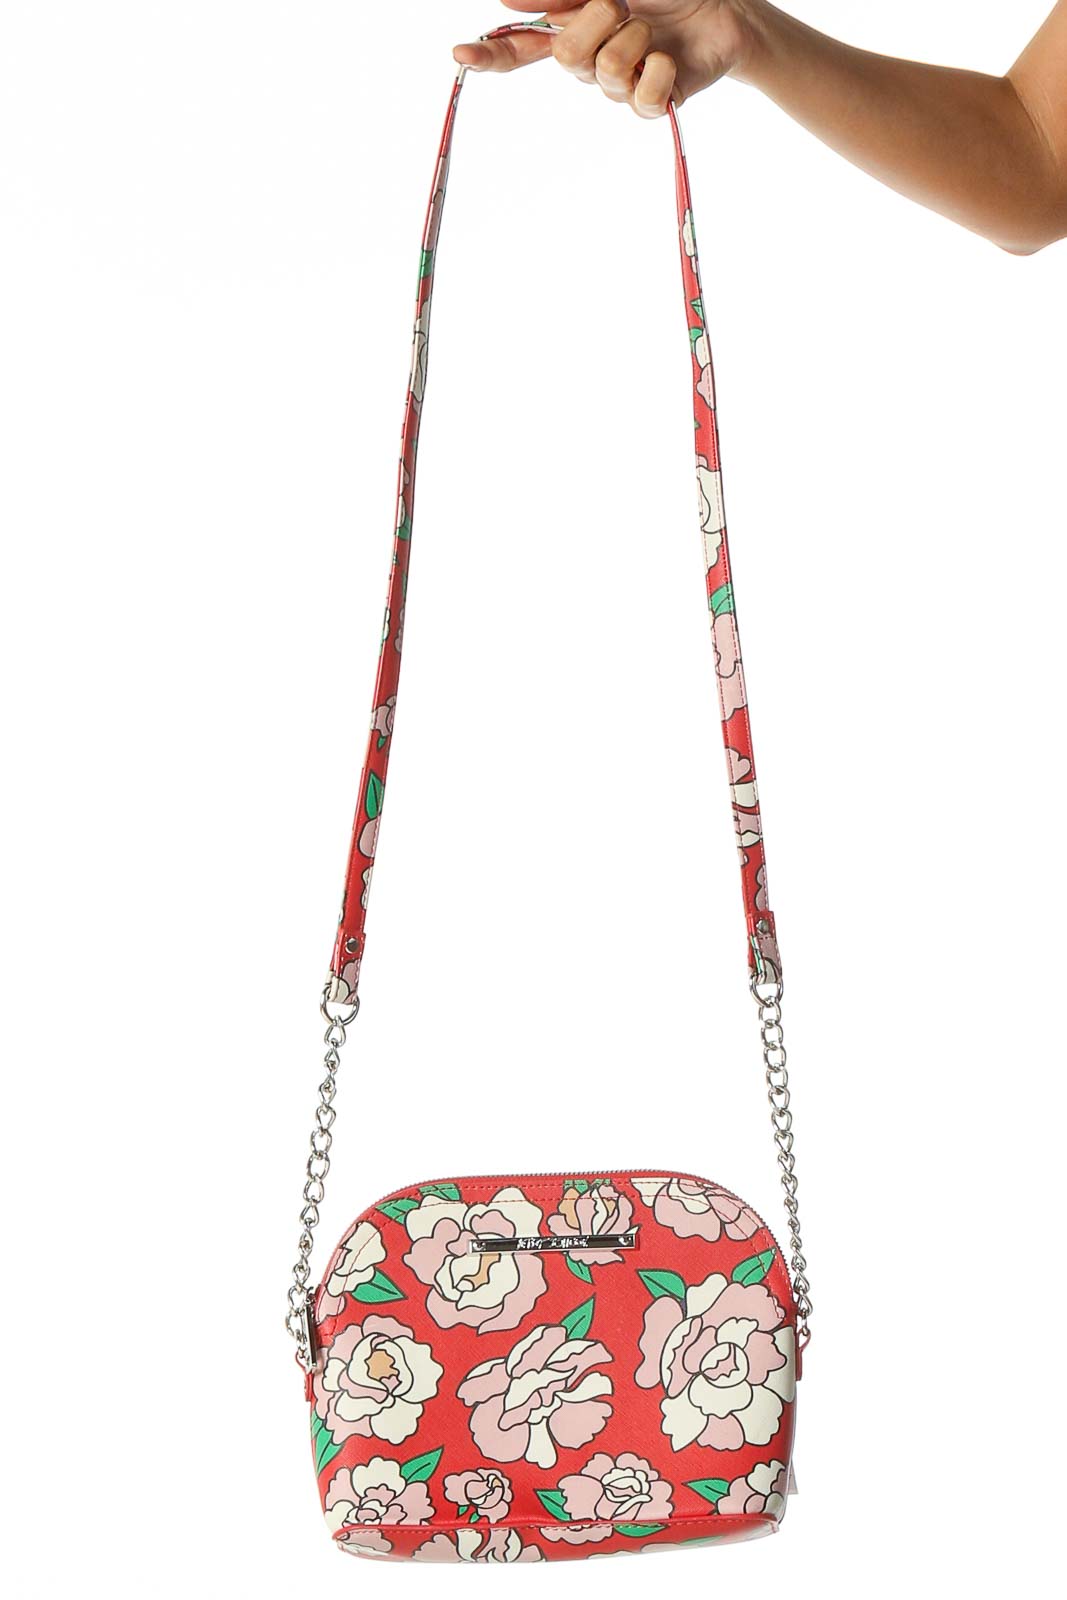 Red Crossbody Bag Front